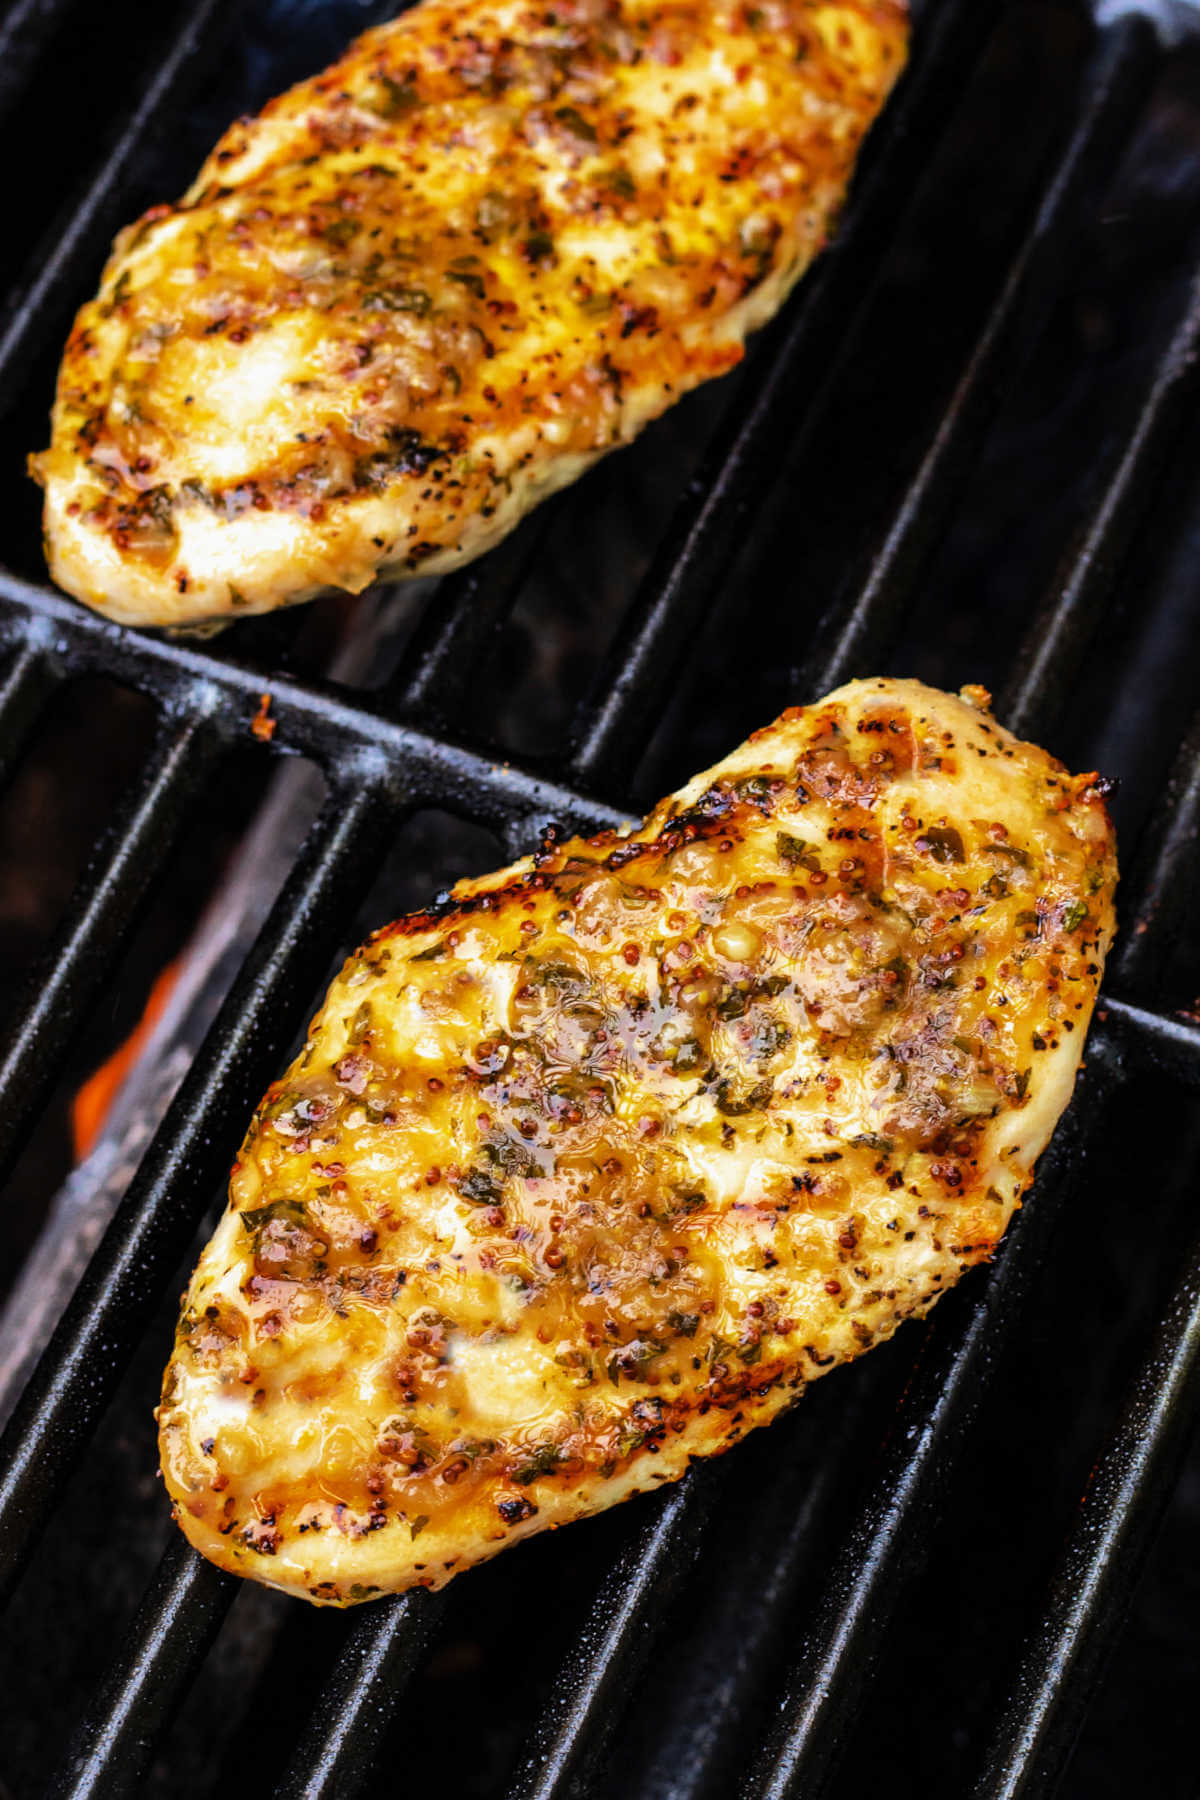 Italian style grilled boneless chicken breast cooking on a gas grill.